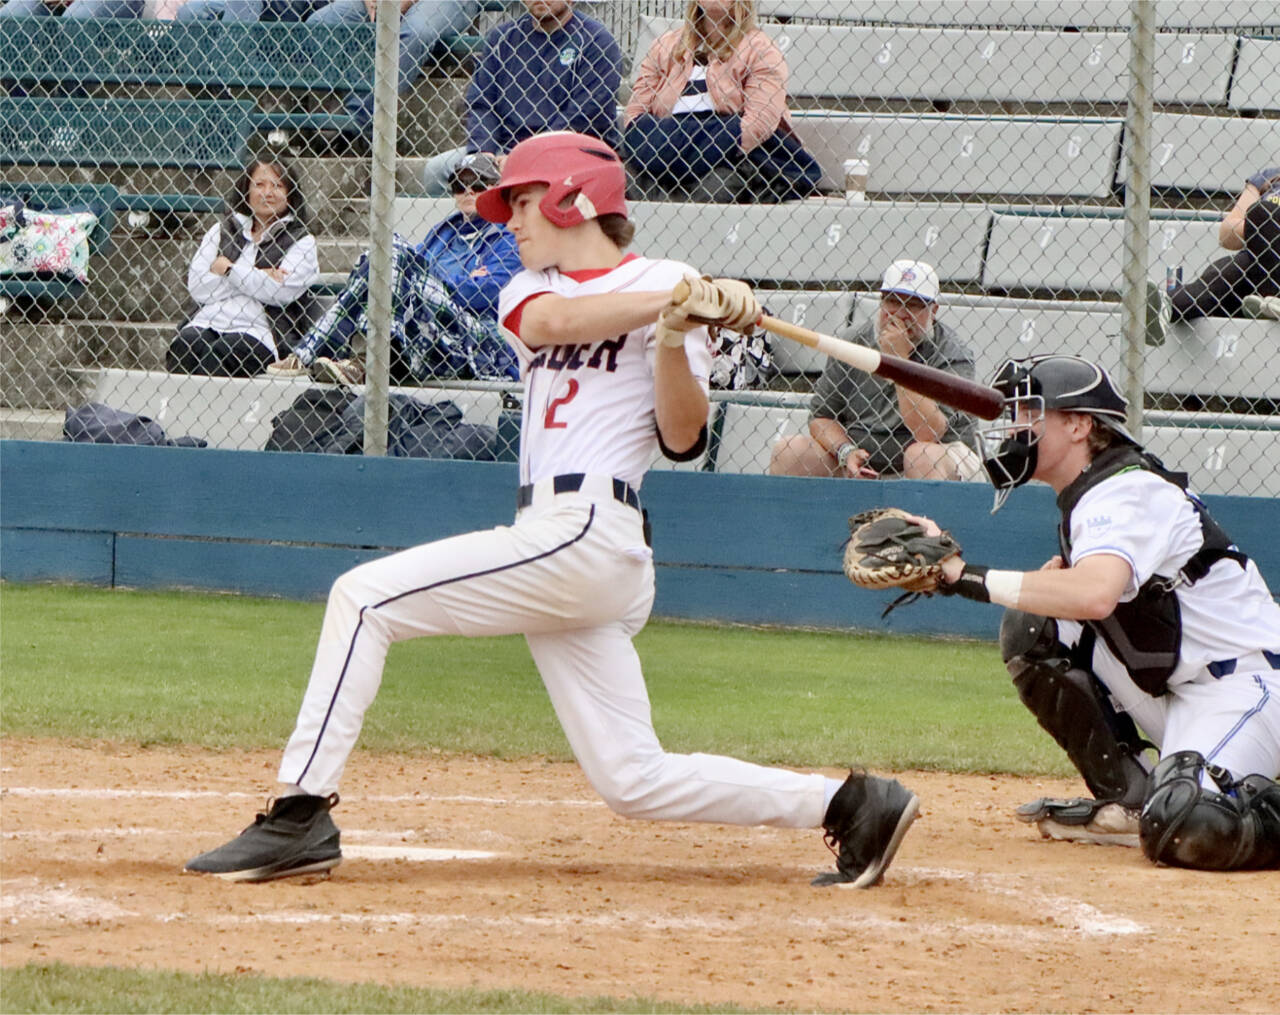 Wilder Senior’s Alex Angevine takes a big cut against the Shoreline Royals on Sunday. Wilder Senior was shut out by the Royals as they went 4-1 in the Dick Brown Memorial Firecracker. (Dave Logan/for Peninsula Daily News)